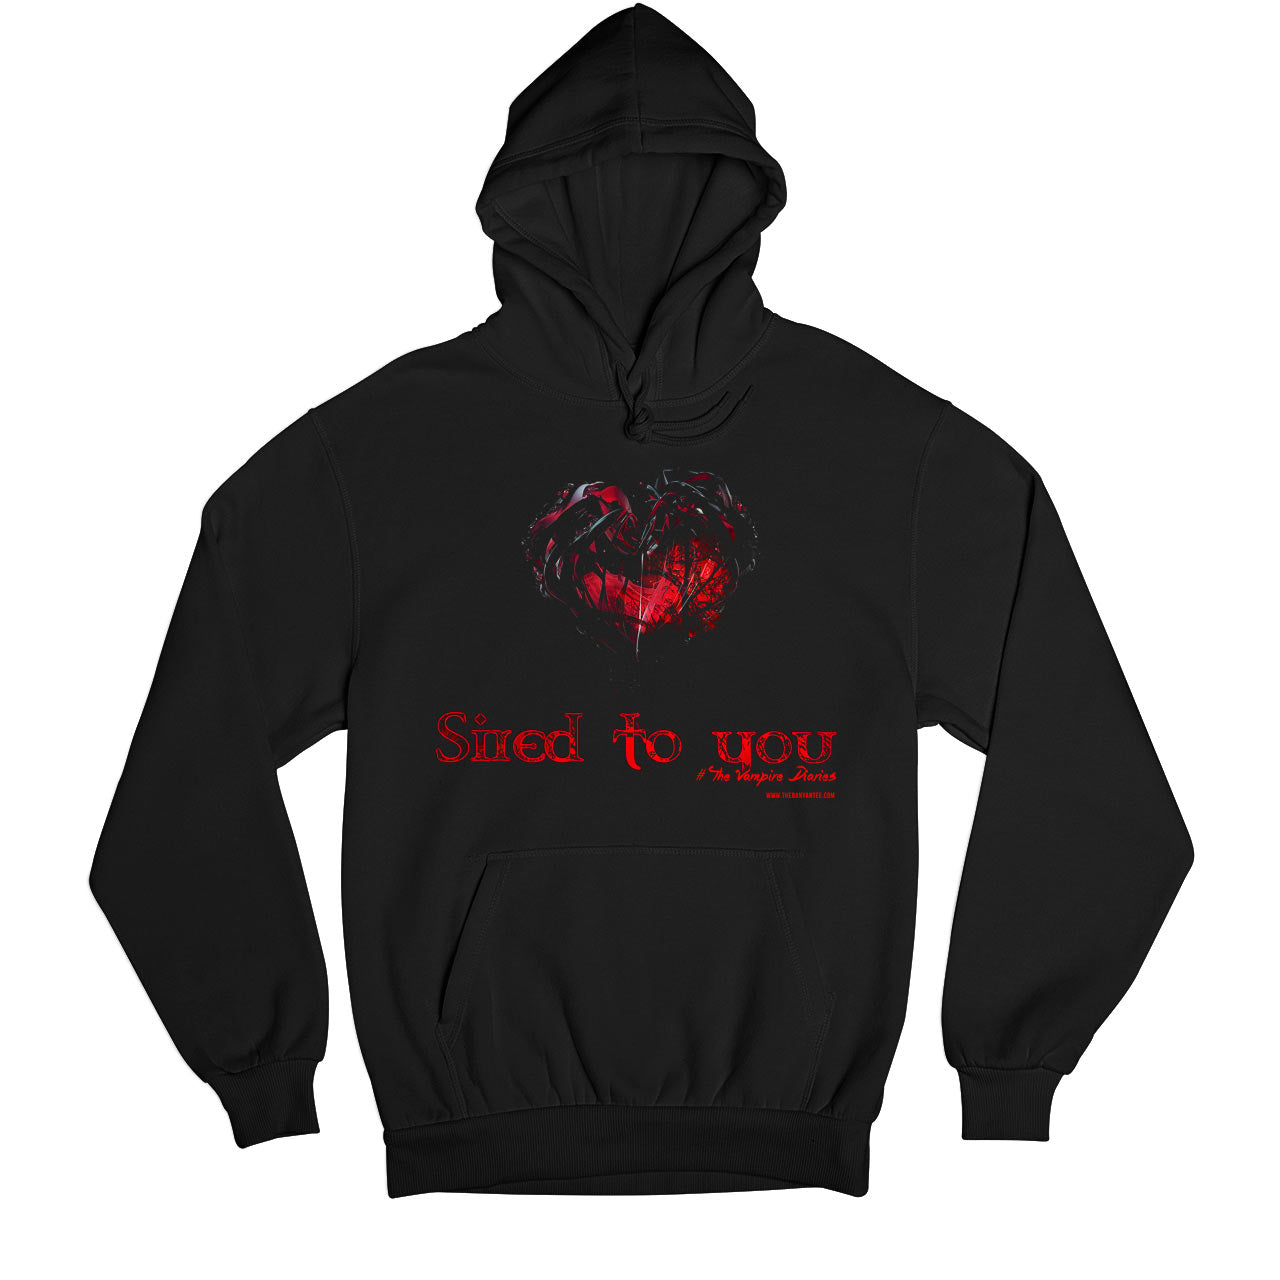 The Vampire Diaries Hoodie - On Sale - S (Chest size 40 IN)